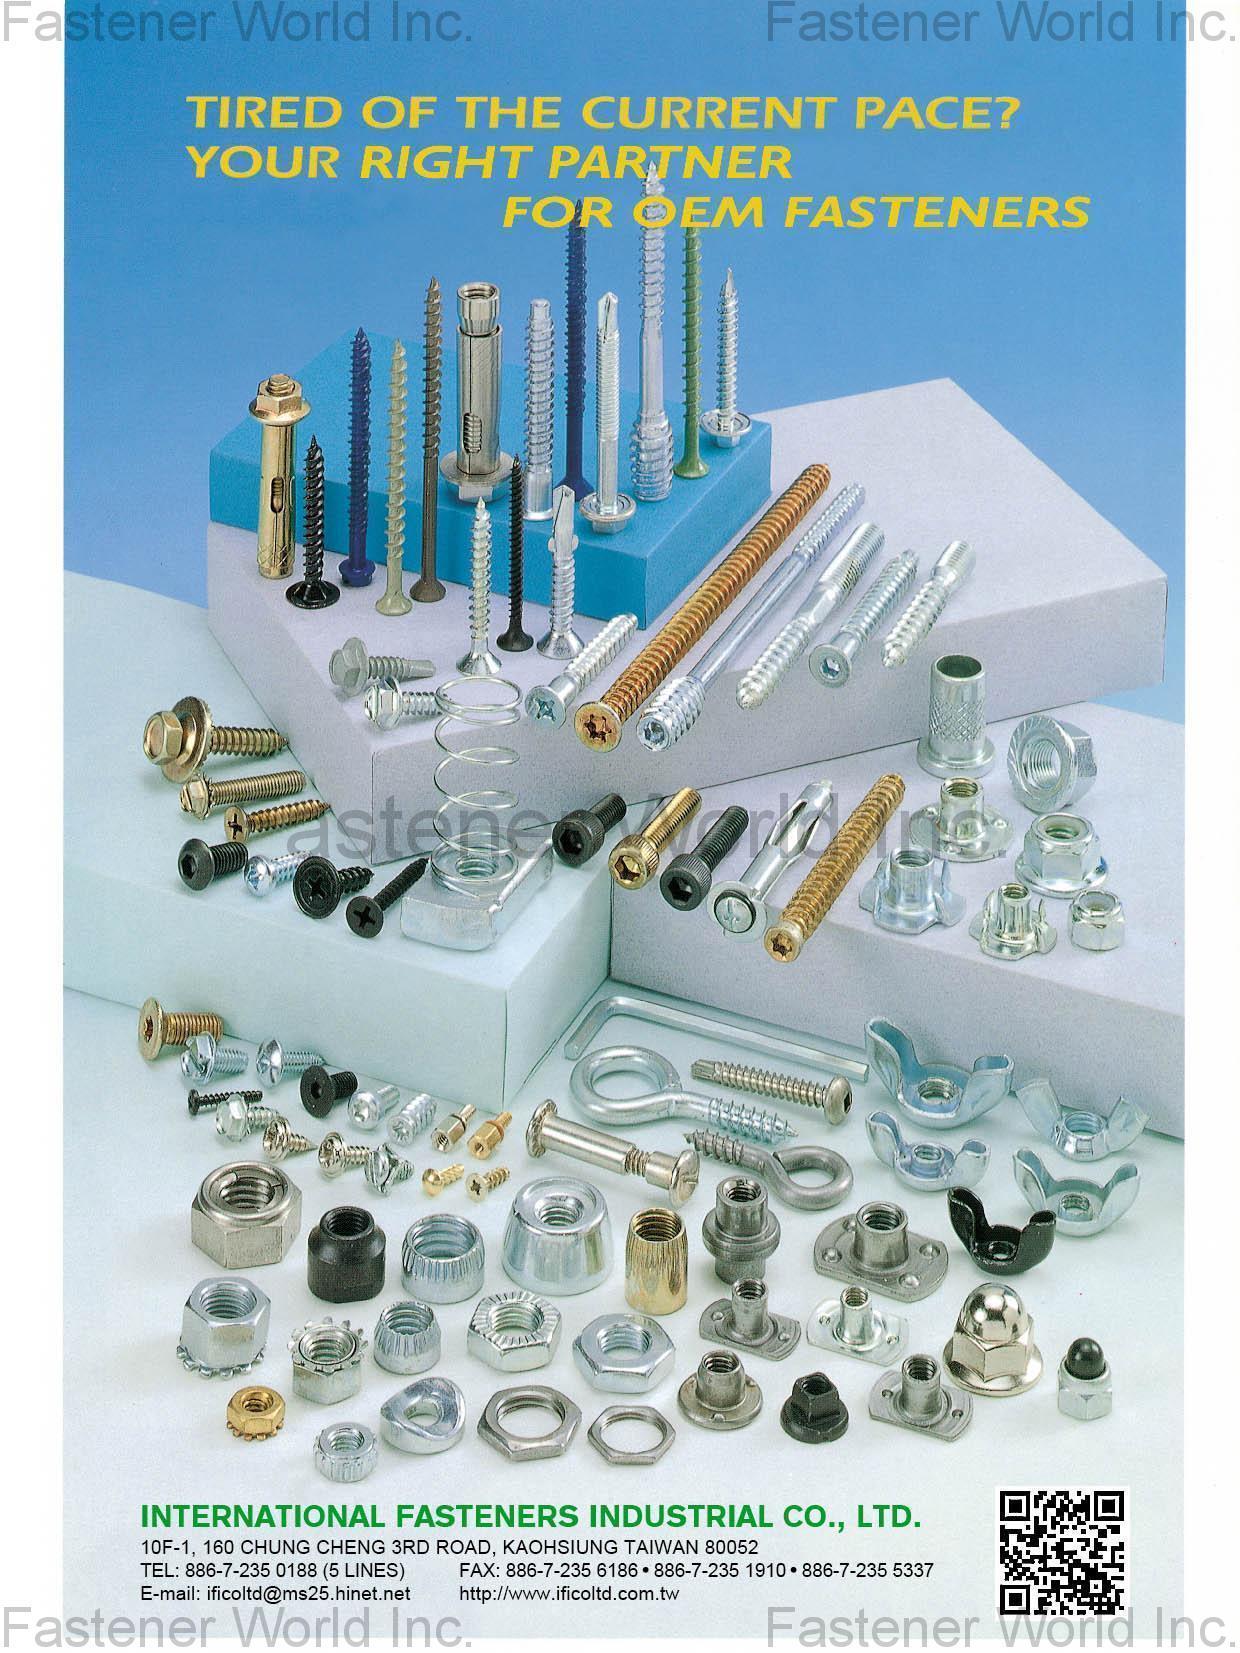 INTERNATIONAL FASTENERS INDUSTRIAL CO., LTD.  , Screws, Nuts, Washer, Pin, Turned Parts, Anchor, Stamped Parts, Rubber , All Kinds of Screws